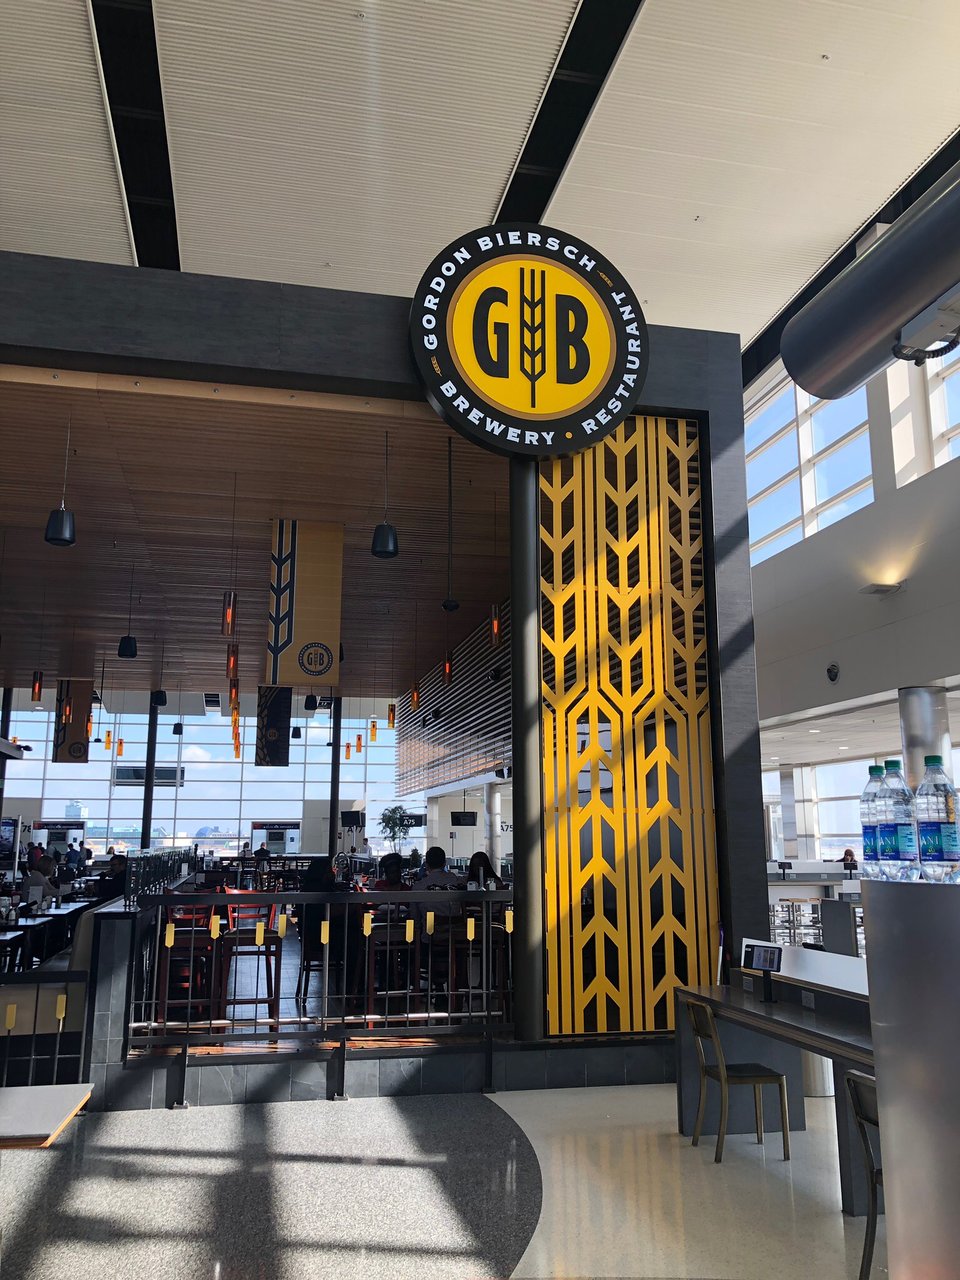 External view of T.G.I. Friday's restaurant entrance within an airport terminal.